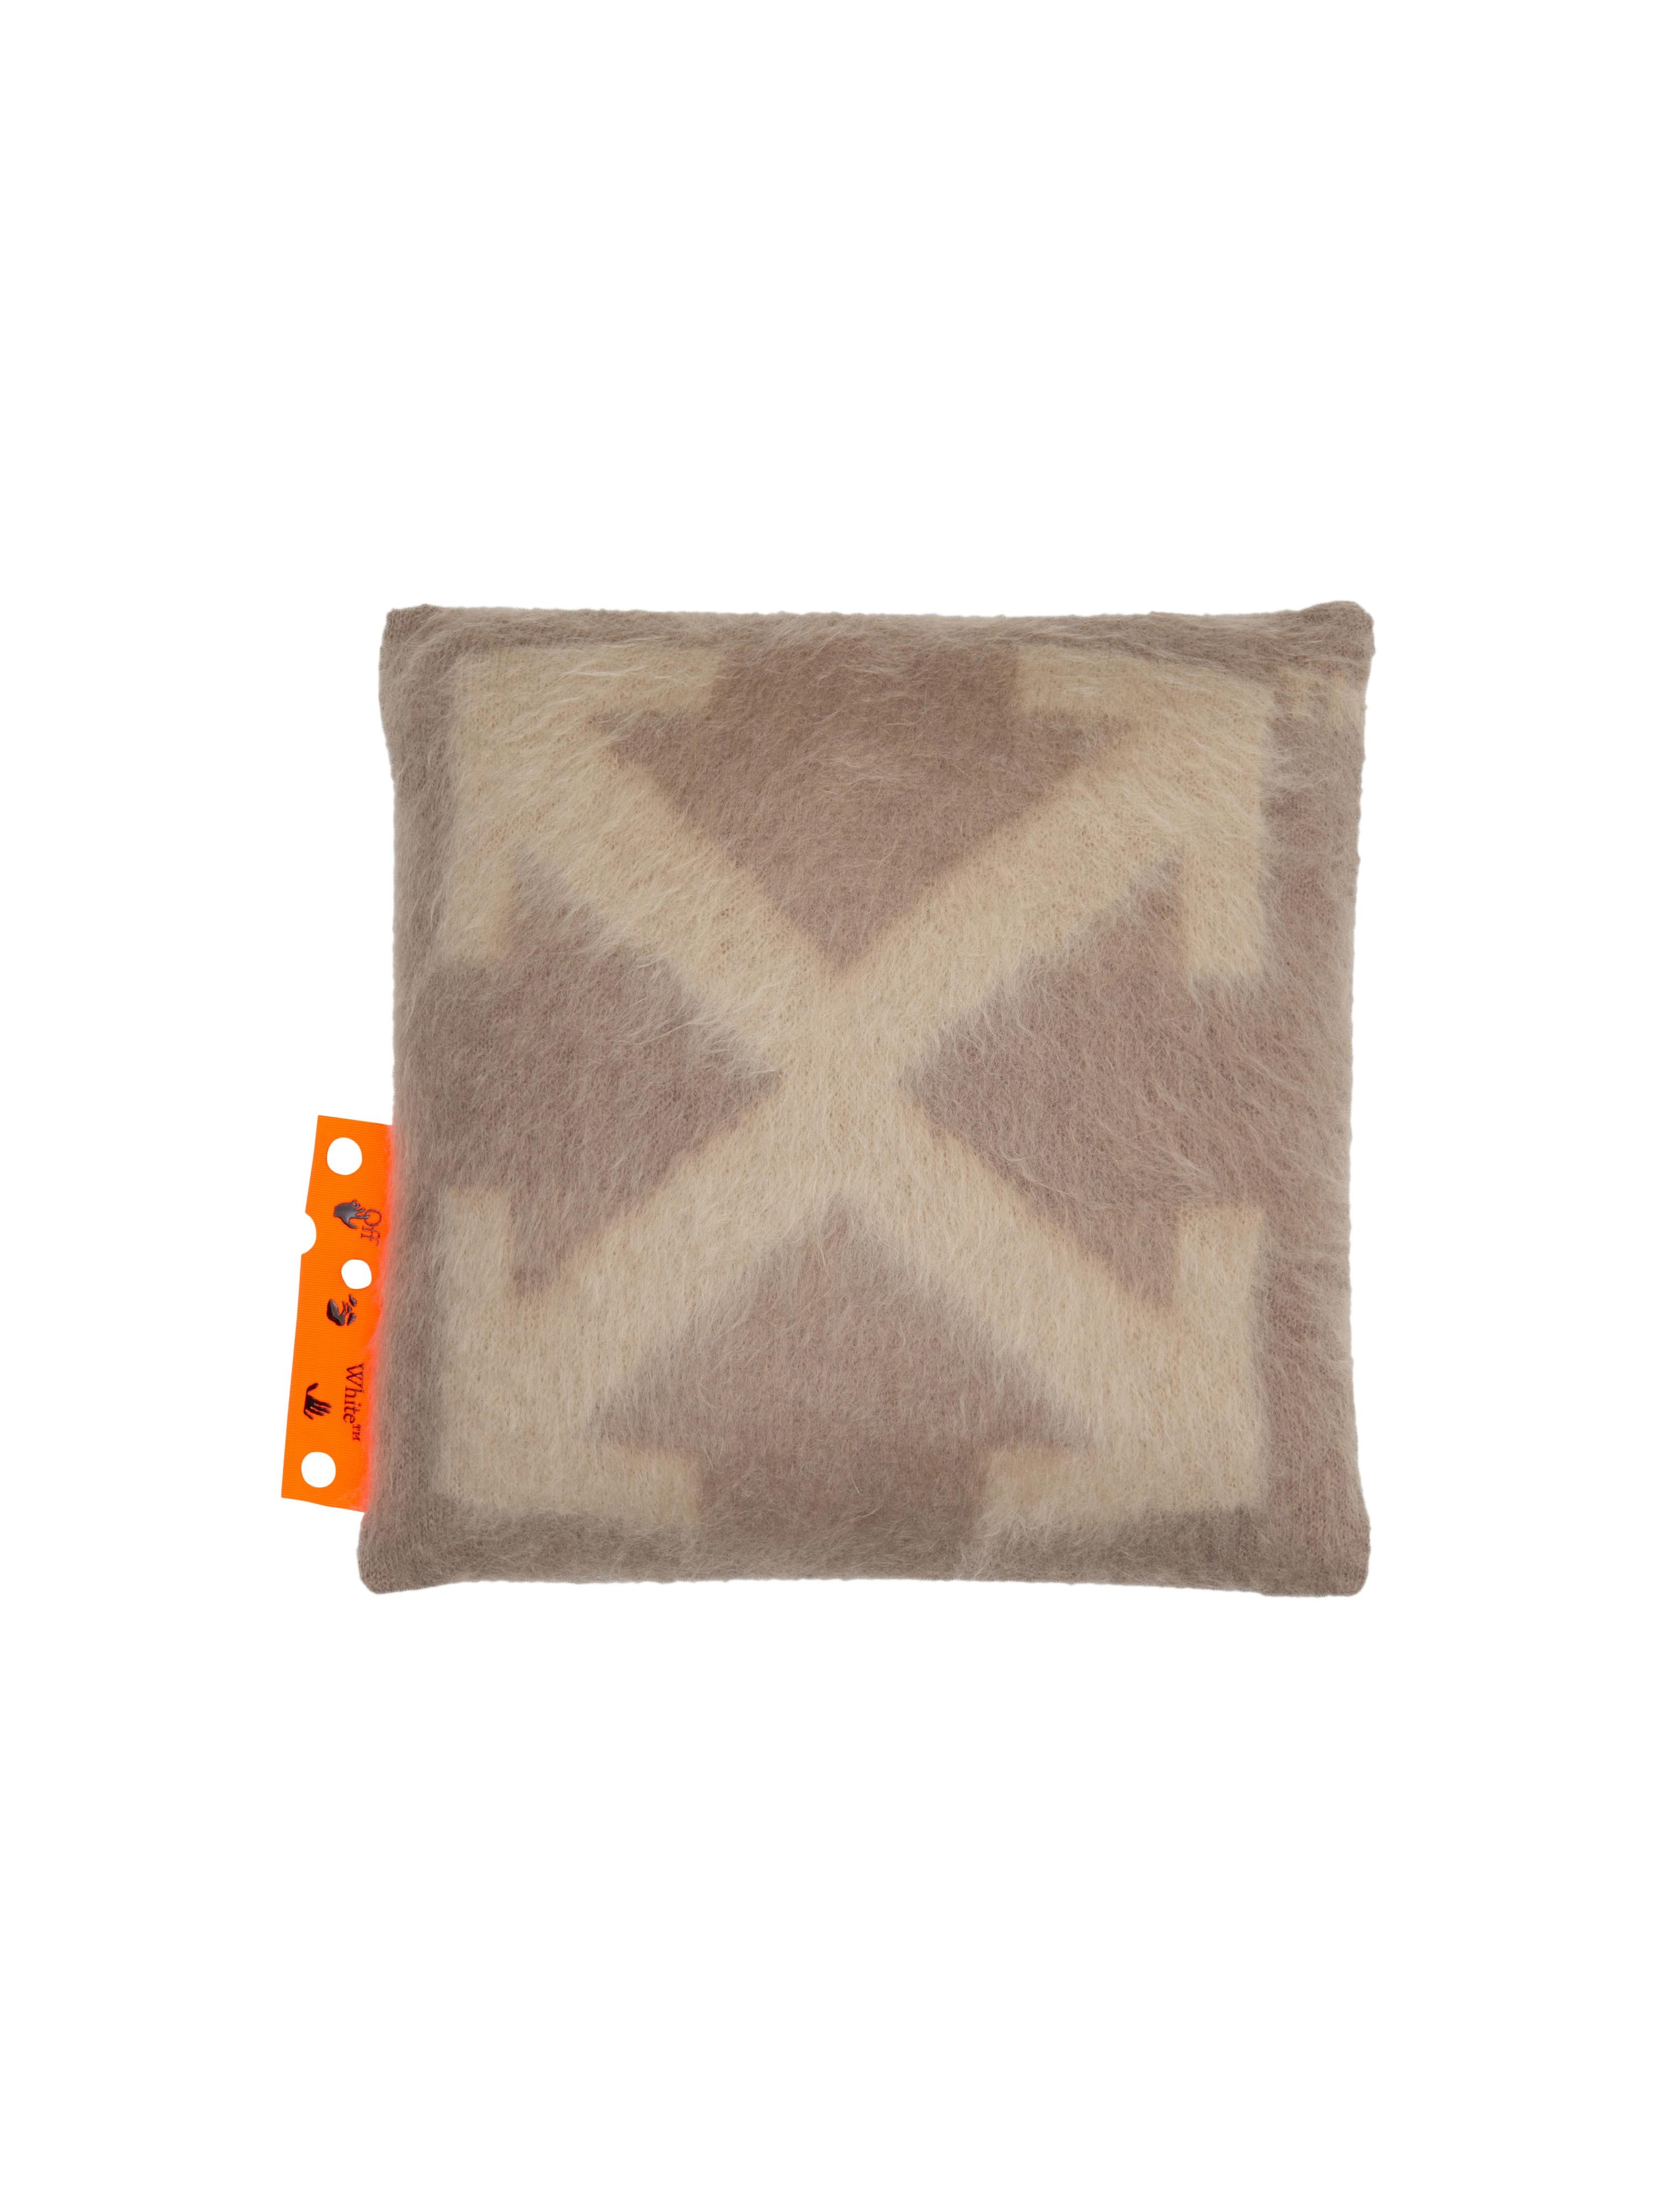 Brushed mohair Small Pillow with big arrow, taupe colors variations
By Virgil Abloh
Dimensions: 45 W x 45 H
This item is only available to be purchased and shipped to the United States.